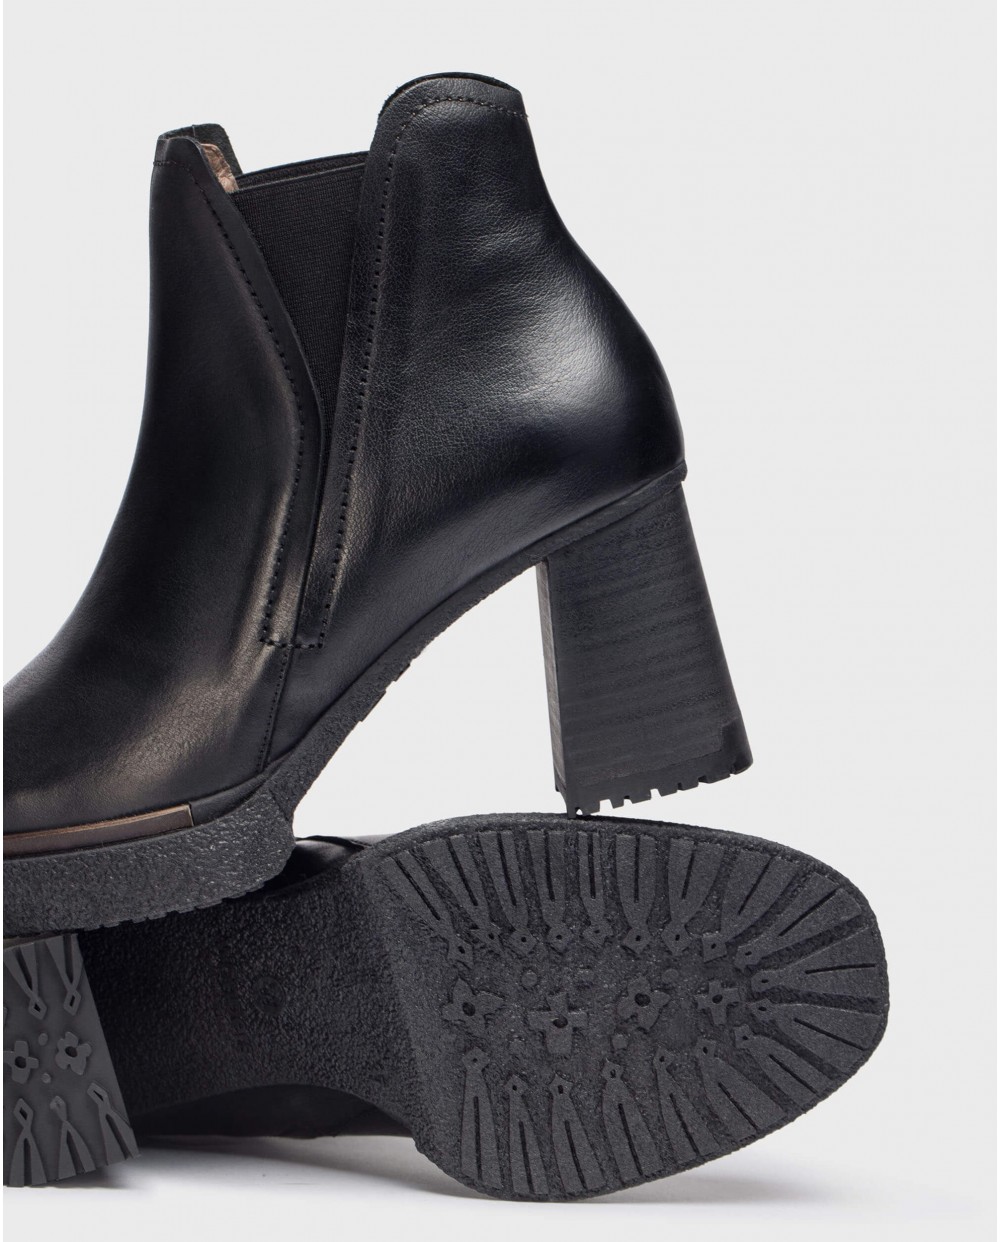 Wonders-Ankle Boots-Black MIERA ankle boot